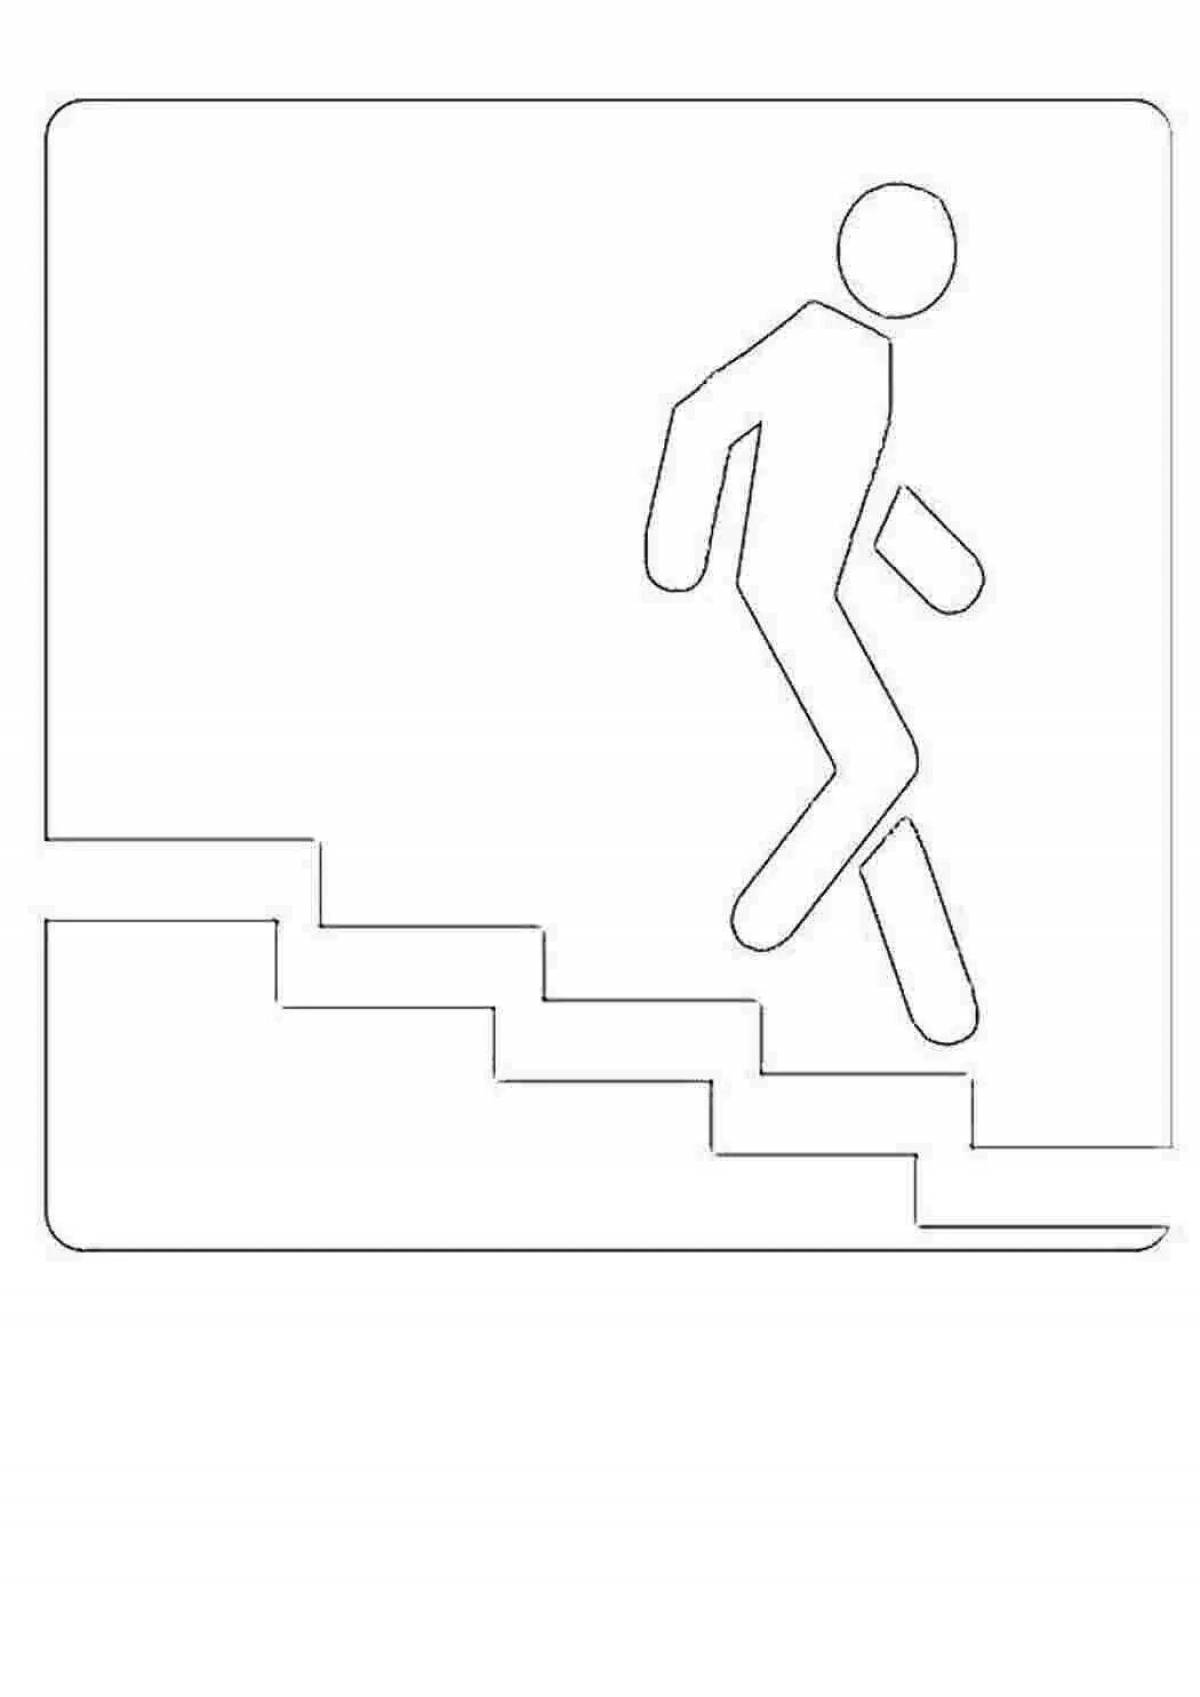 Coloring page shiny pedestrian signs